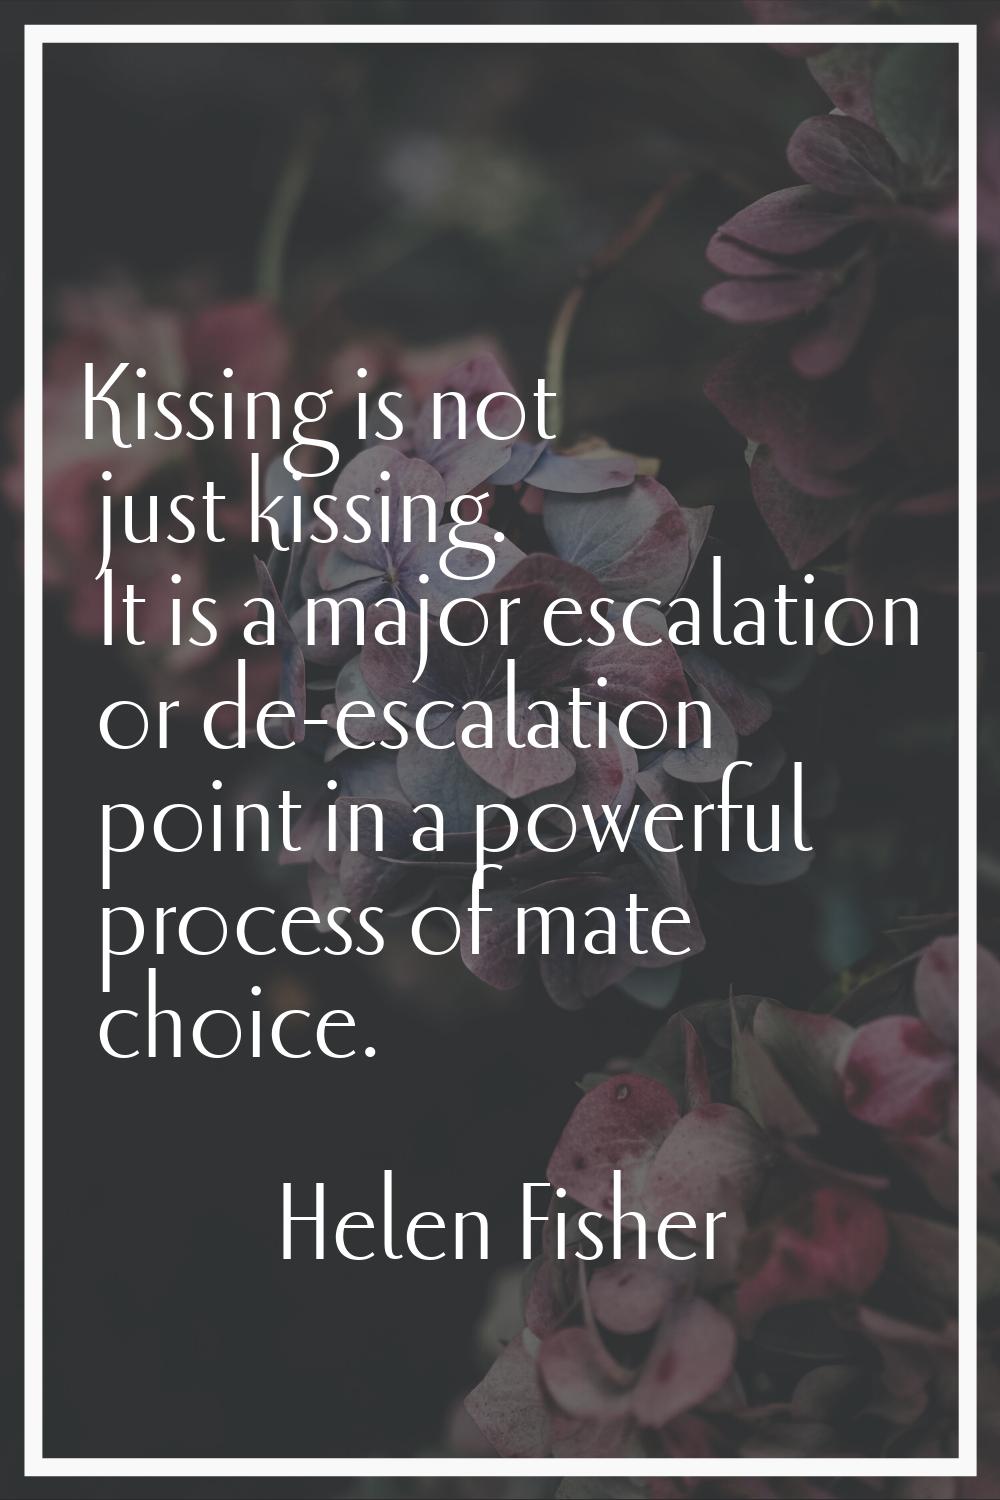 Kissing is not just kissing. It is a major escalation or de-escalation point in a powerful process 